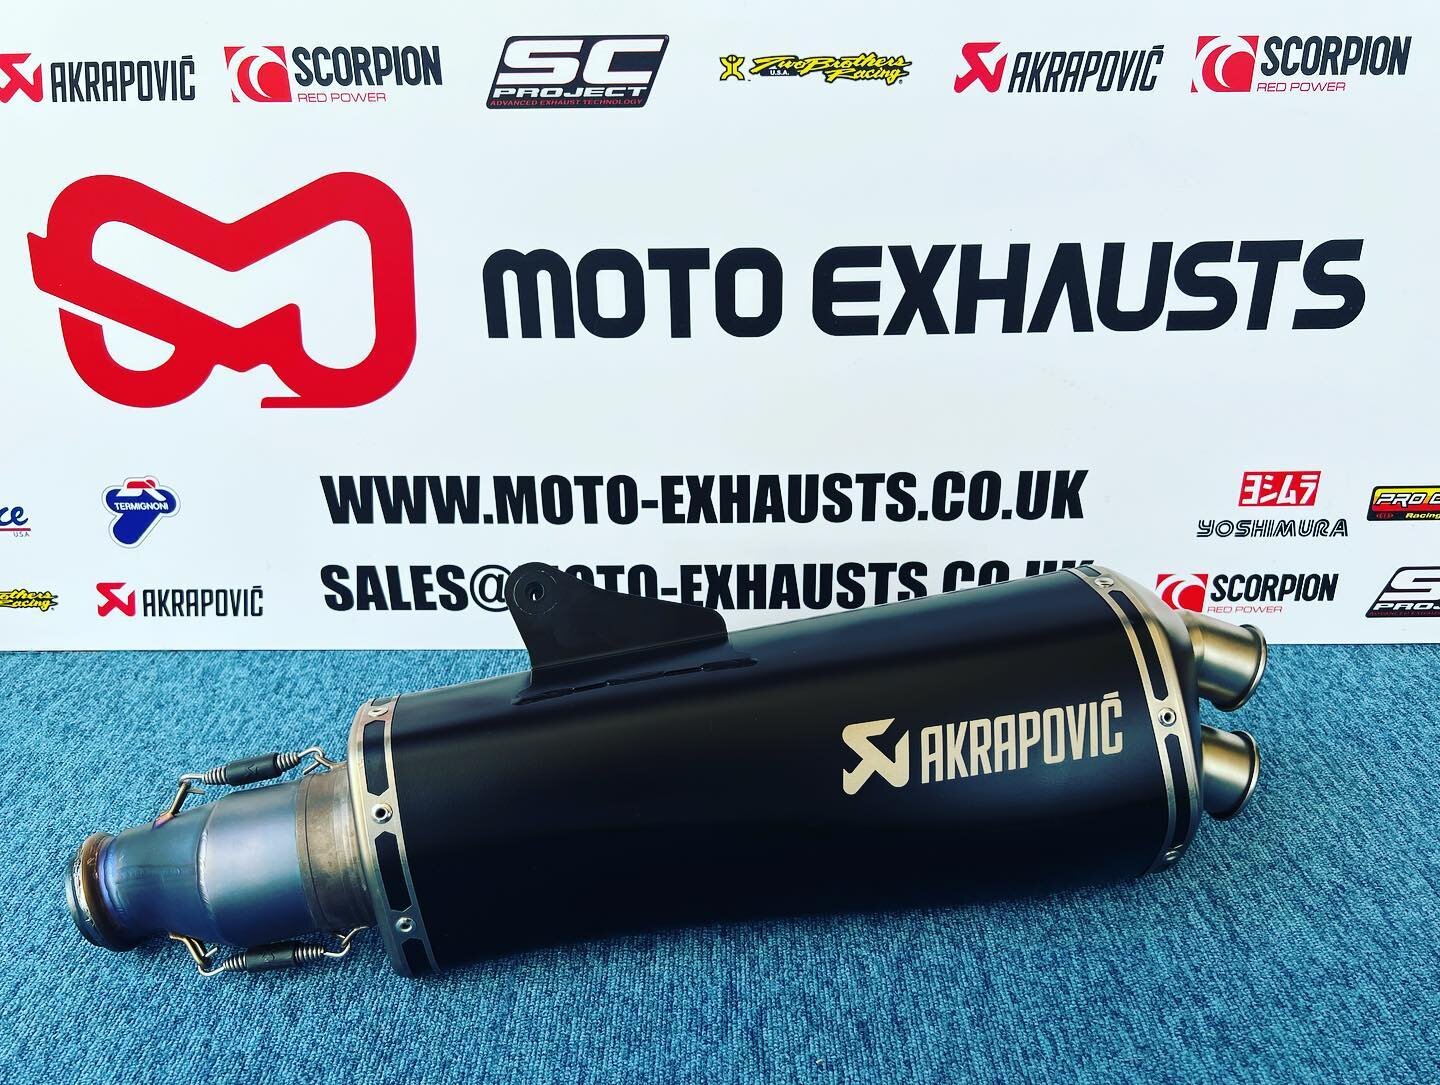 Akrapovic is synonymous for quality and performance. Their 2019+ KTM 690 Enduro/SMC-R Slip-On Exhaust is a perfect example of that. Guaranteed Weight Reduction, Throatier Sound and Better Performance are just a few of the benefits you can expect from